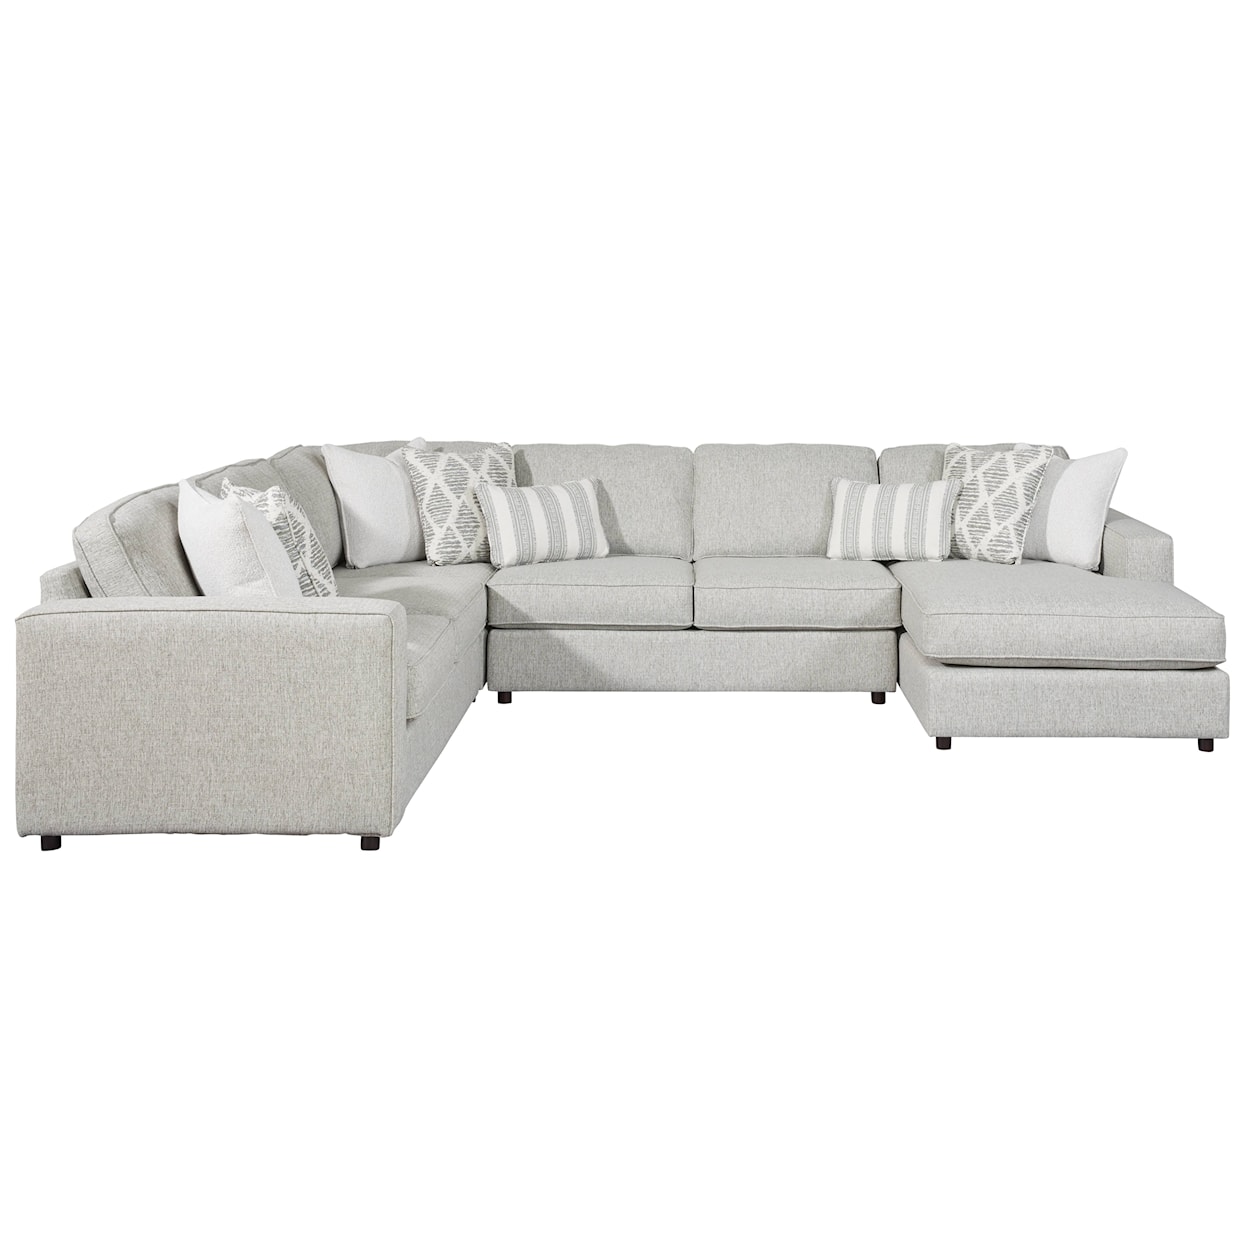 Fusion Furniture 2061 DURANGO FOAM Sectional with Right Chaise